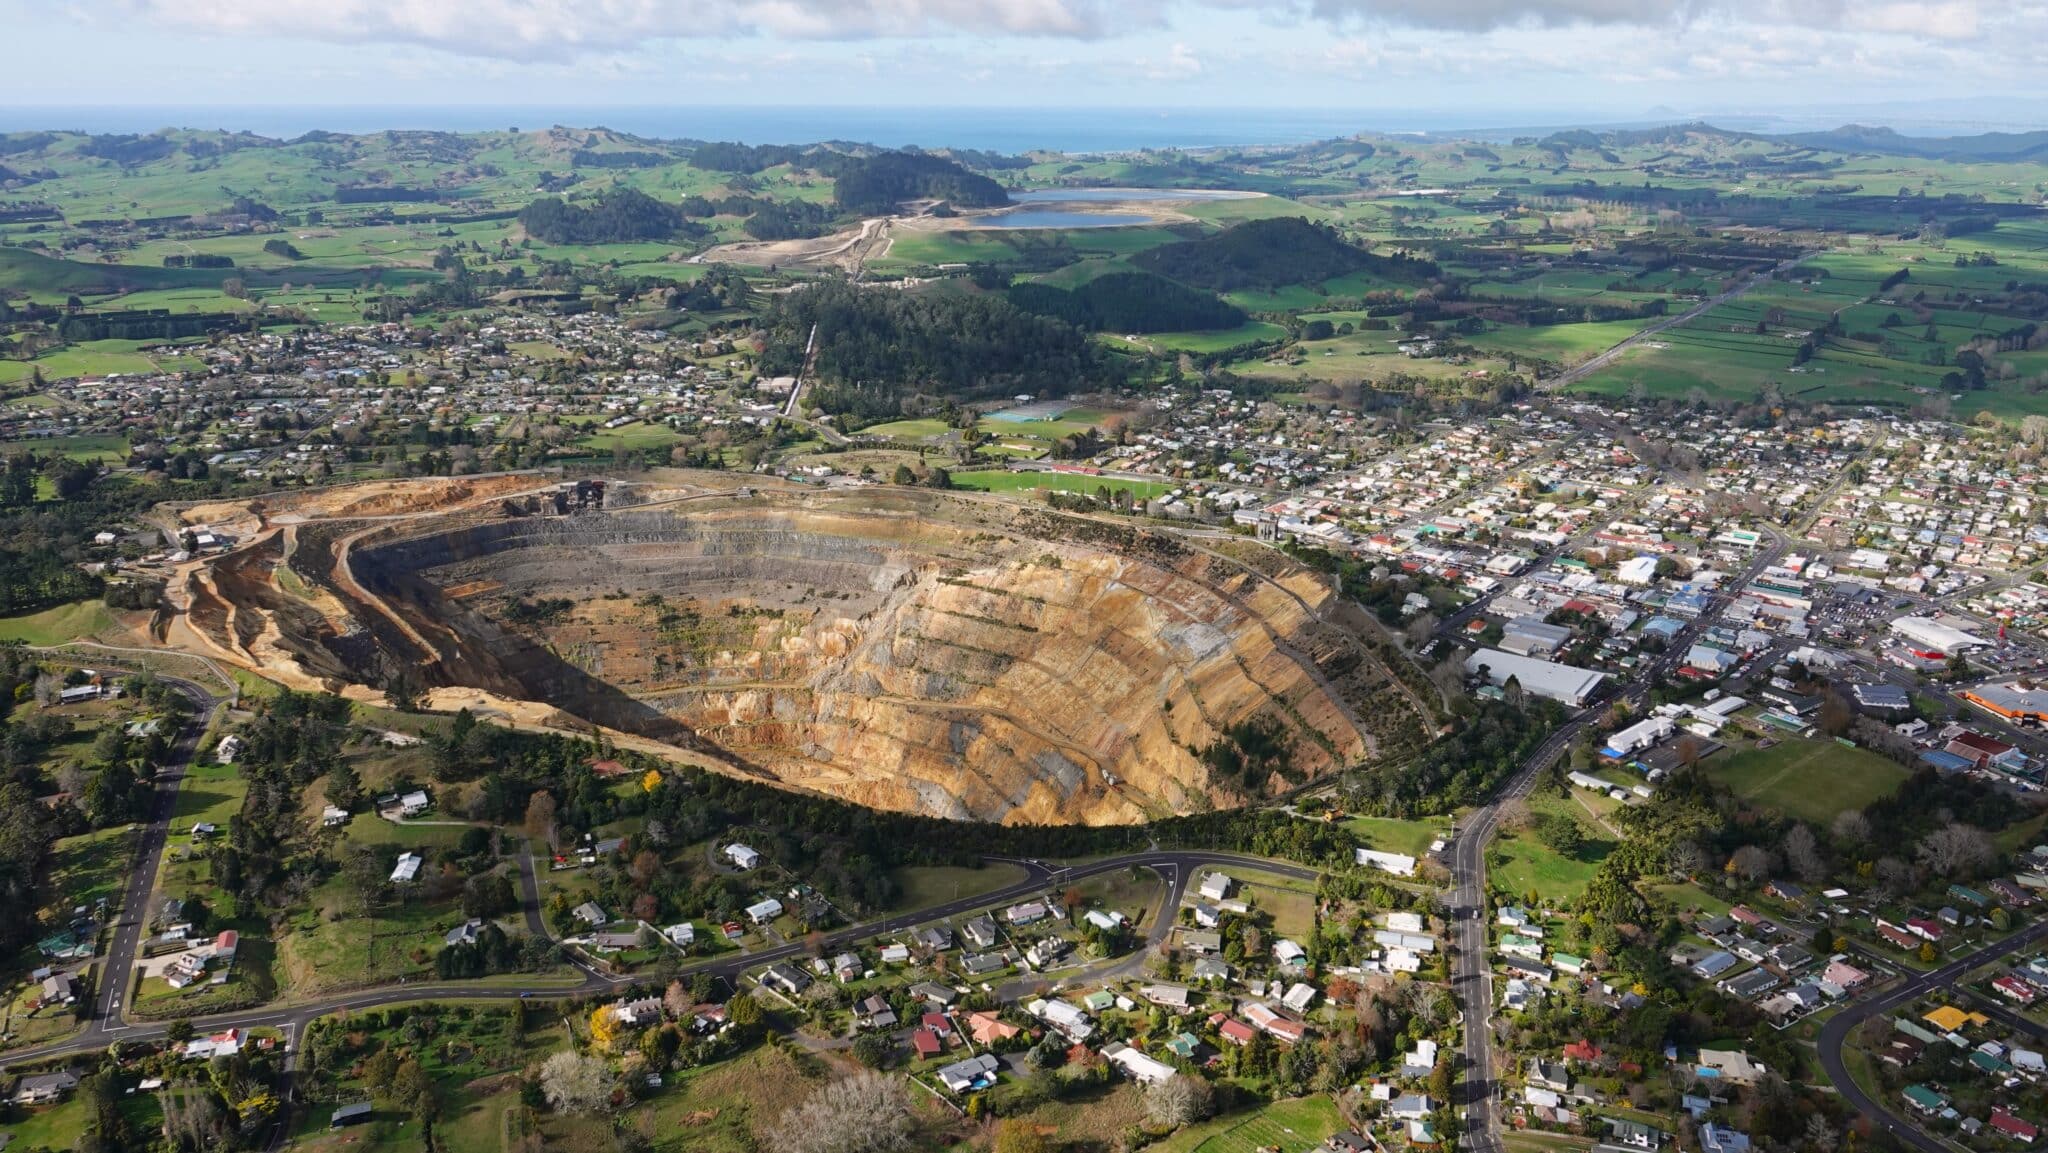 OceanaGold pilots innovative digital response for managing the Waihi Tailings Storage Facility